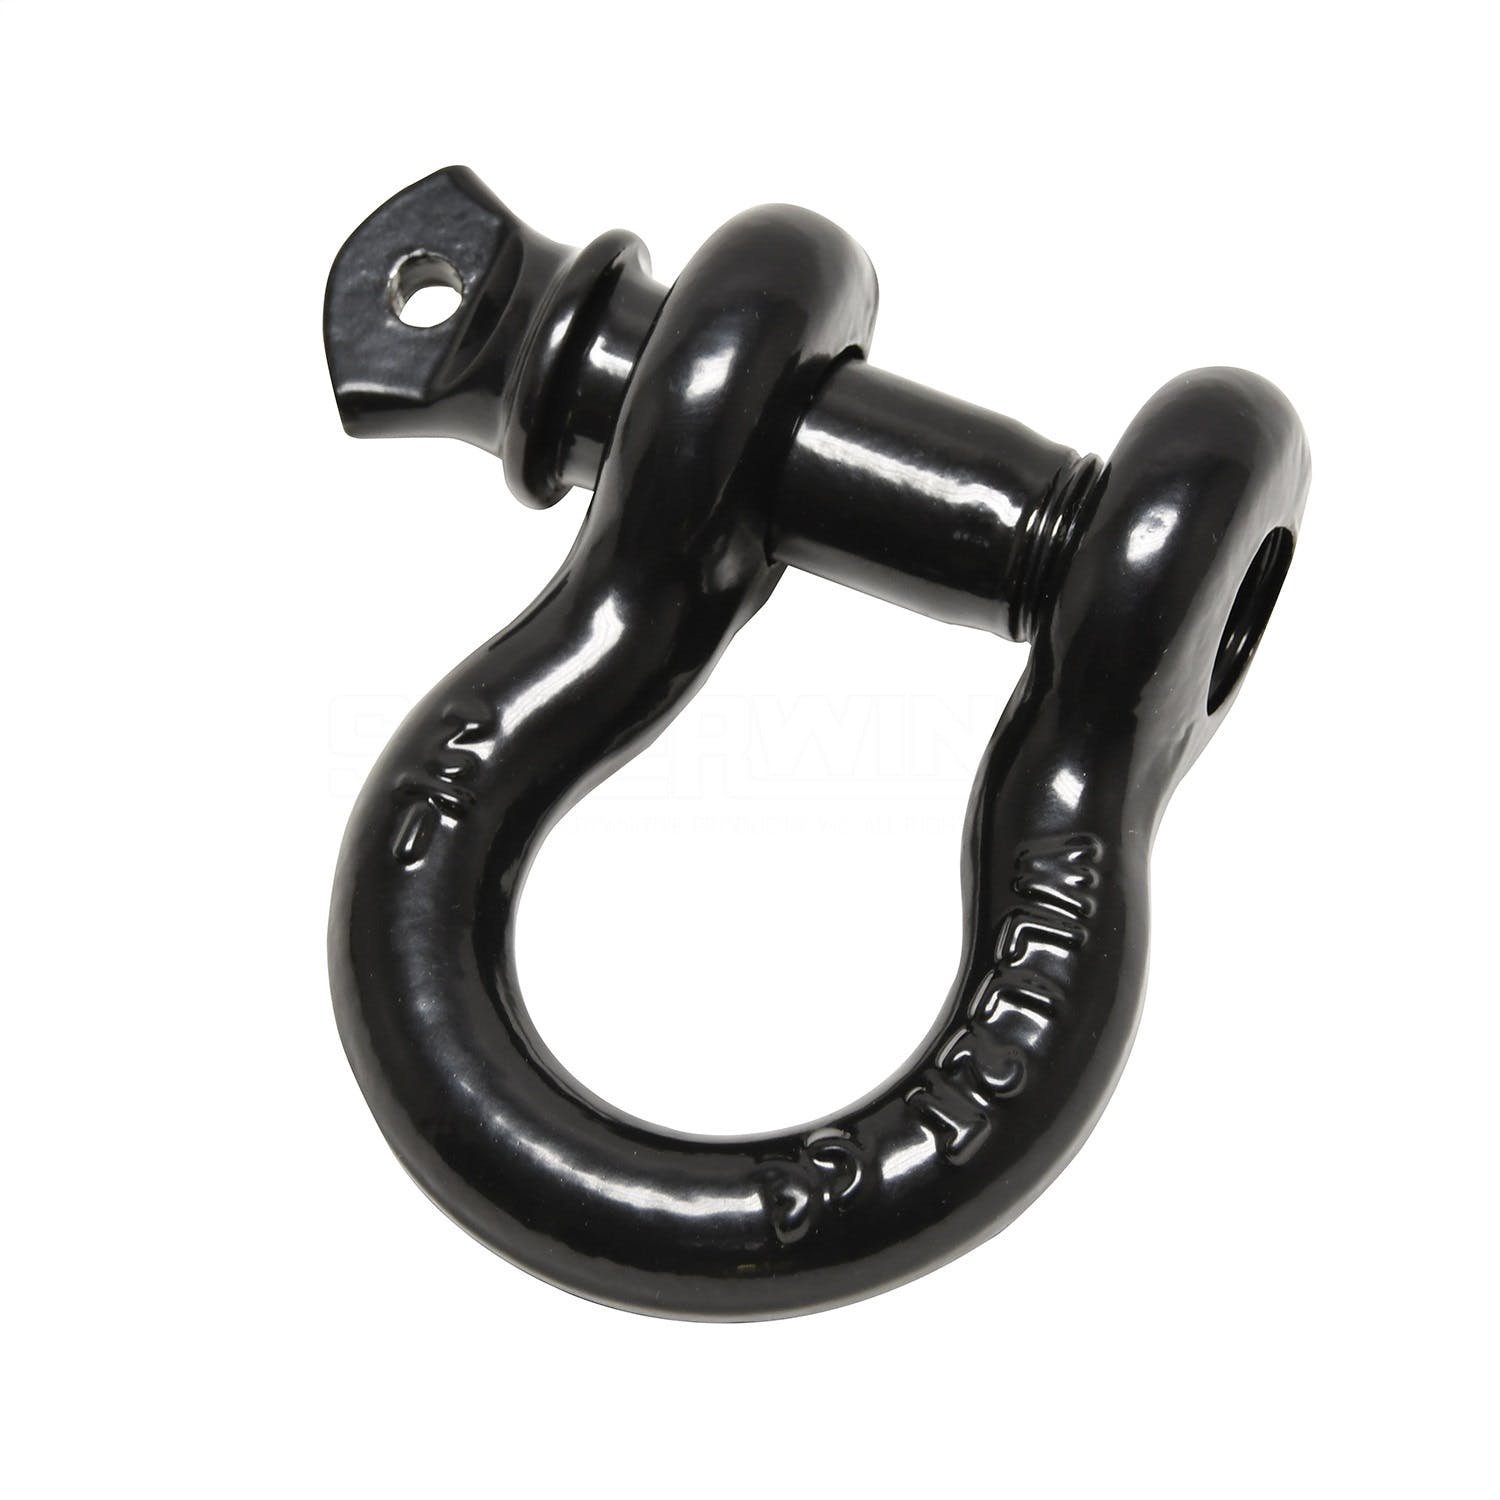 Superwinch 2538 Bow Shackle